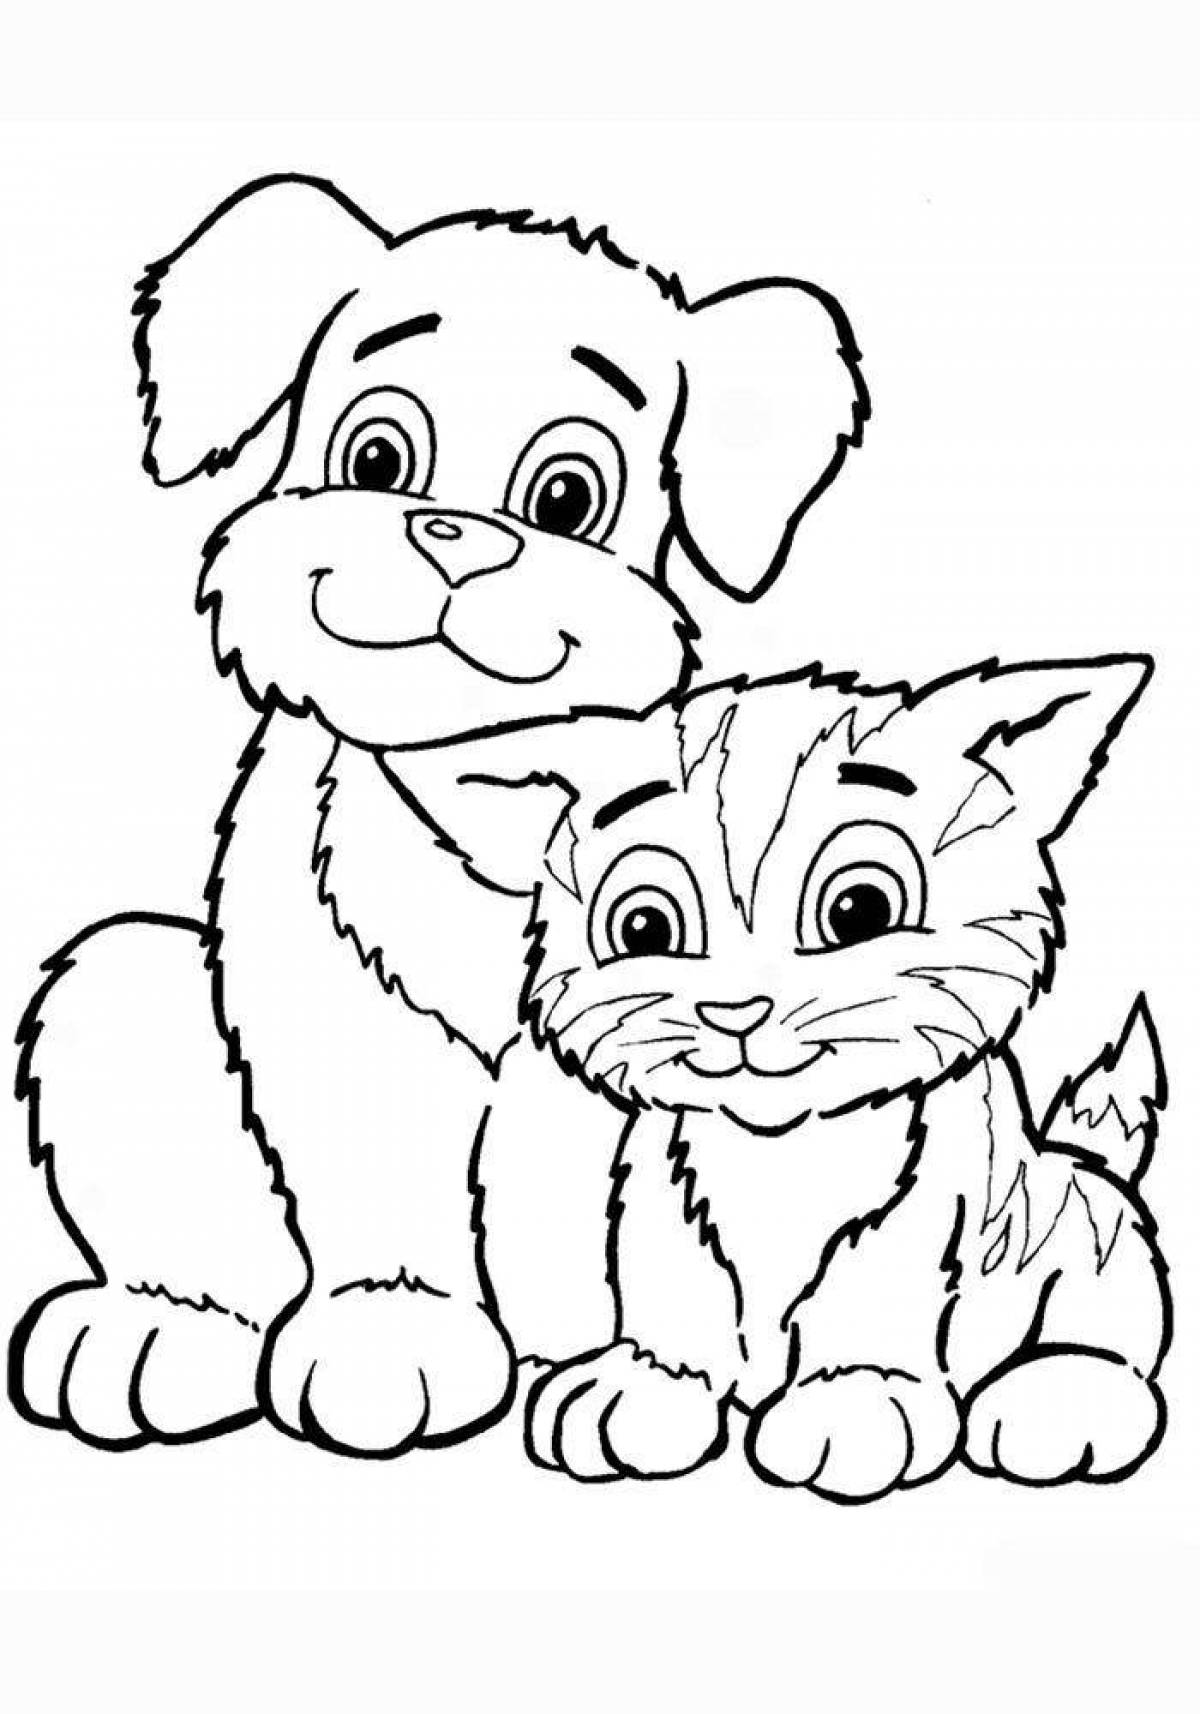 Soft coloring animals cats and dogs